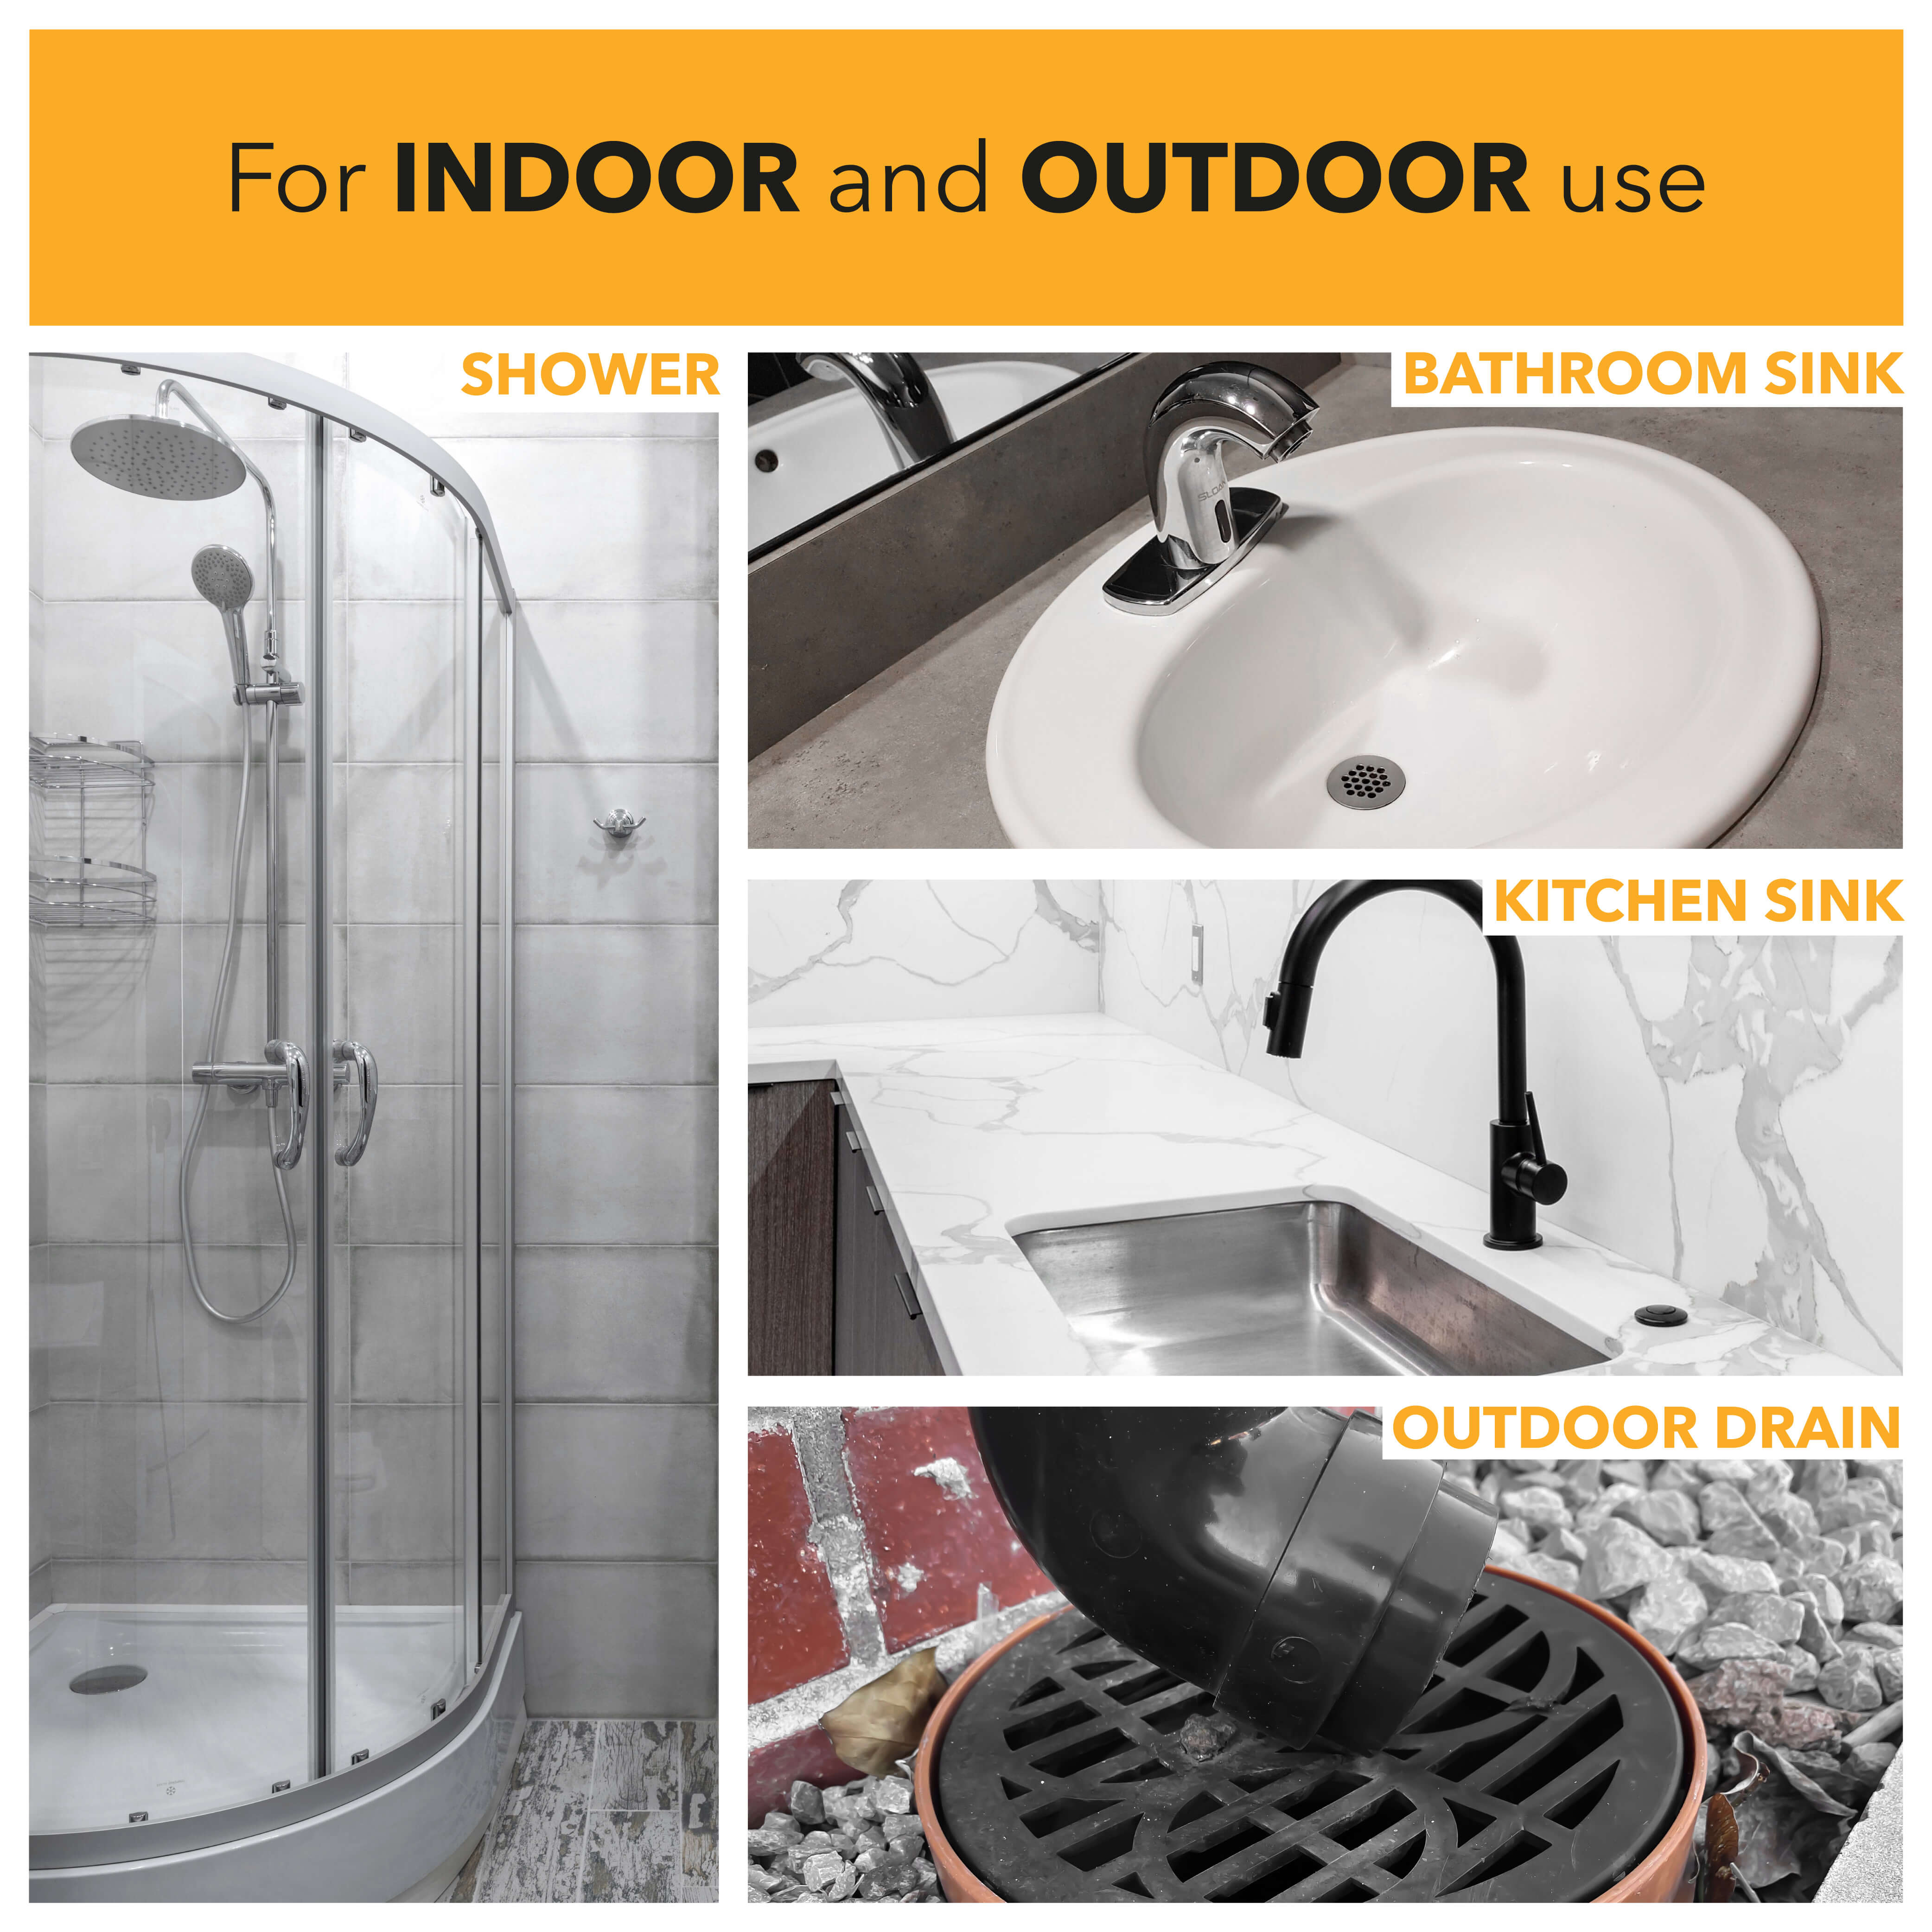 For indoor and outdoor use including shower, bathroom sink, kitchen sink, and outdoor drains